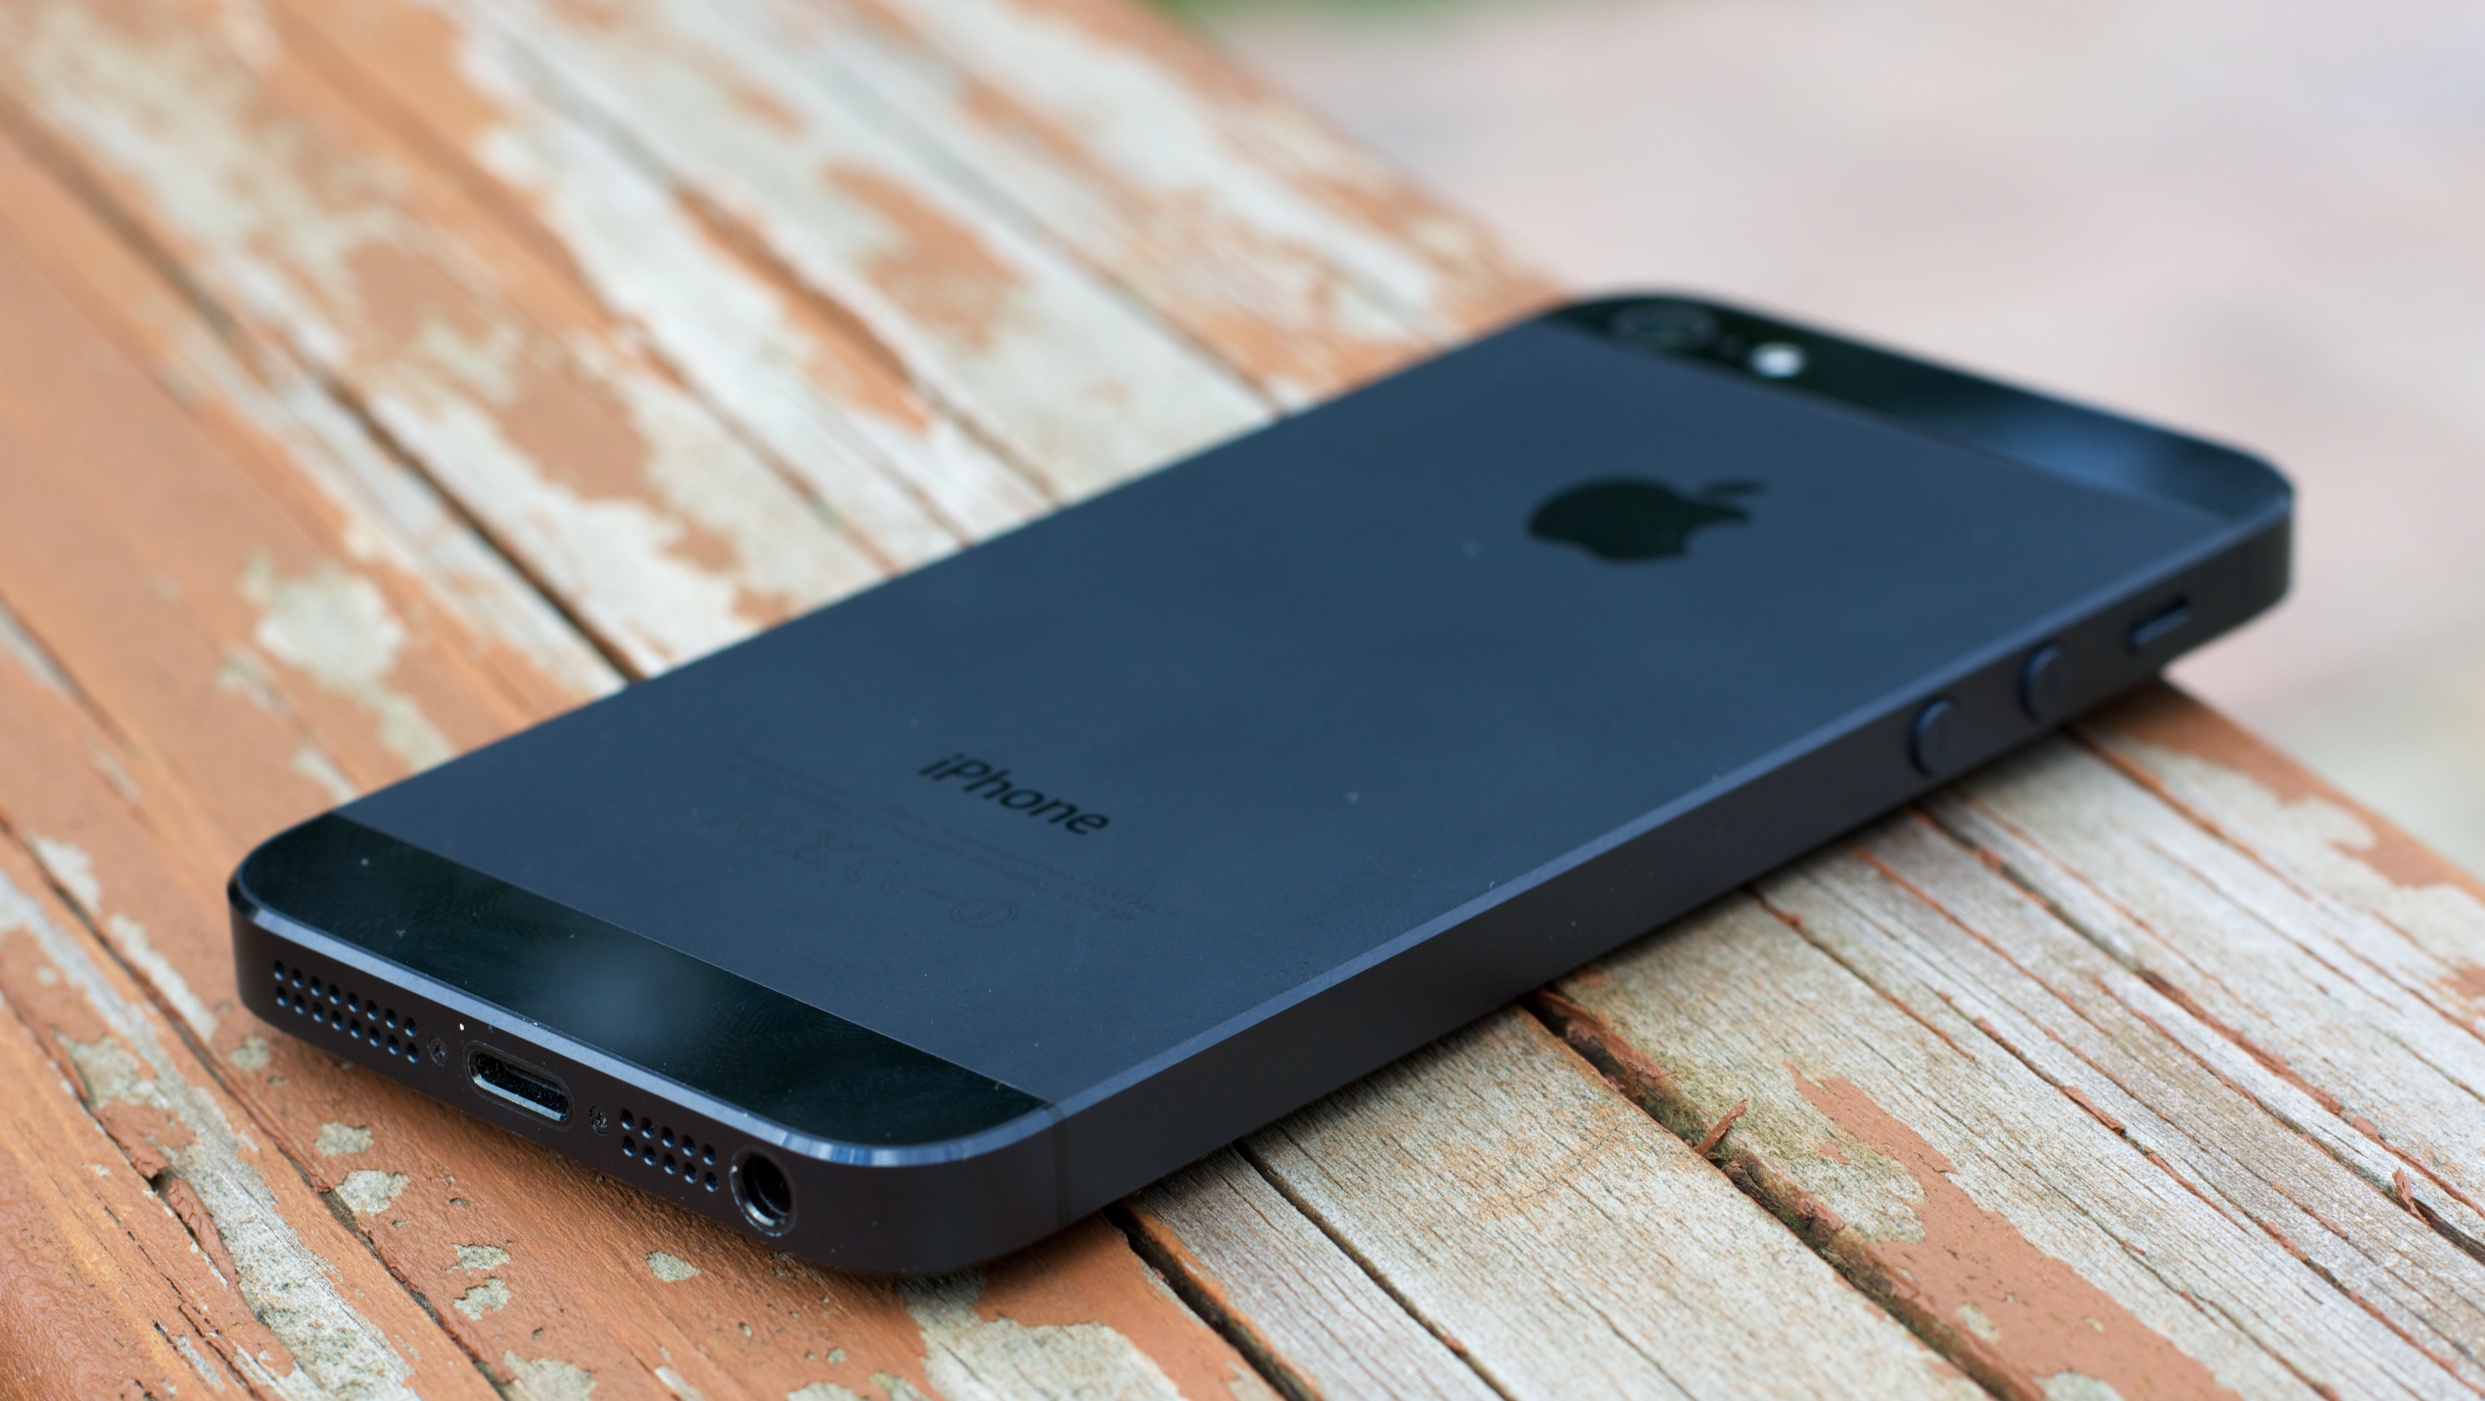 Iphone 5s And Iphone 5c Release Date Rumors Swirl